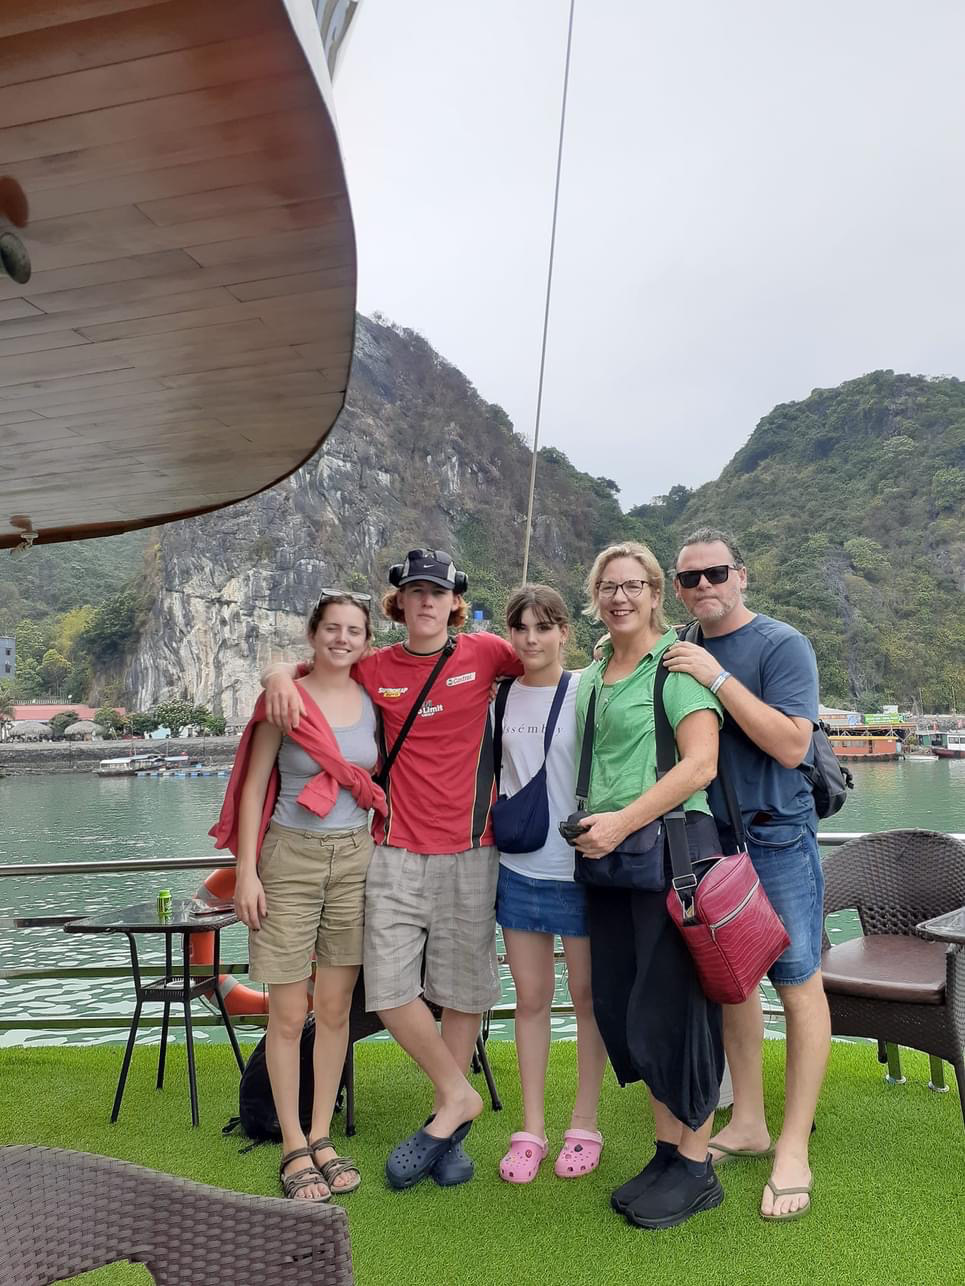 Liz McGrath (second from right) and her family take a photo during their trip to Vietnam. Photo: Supplied